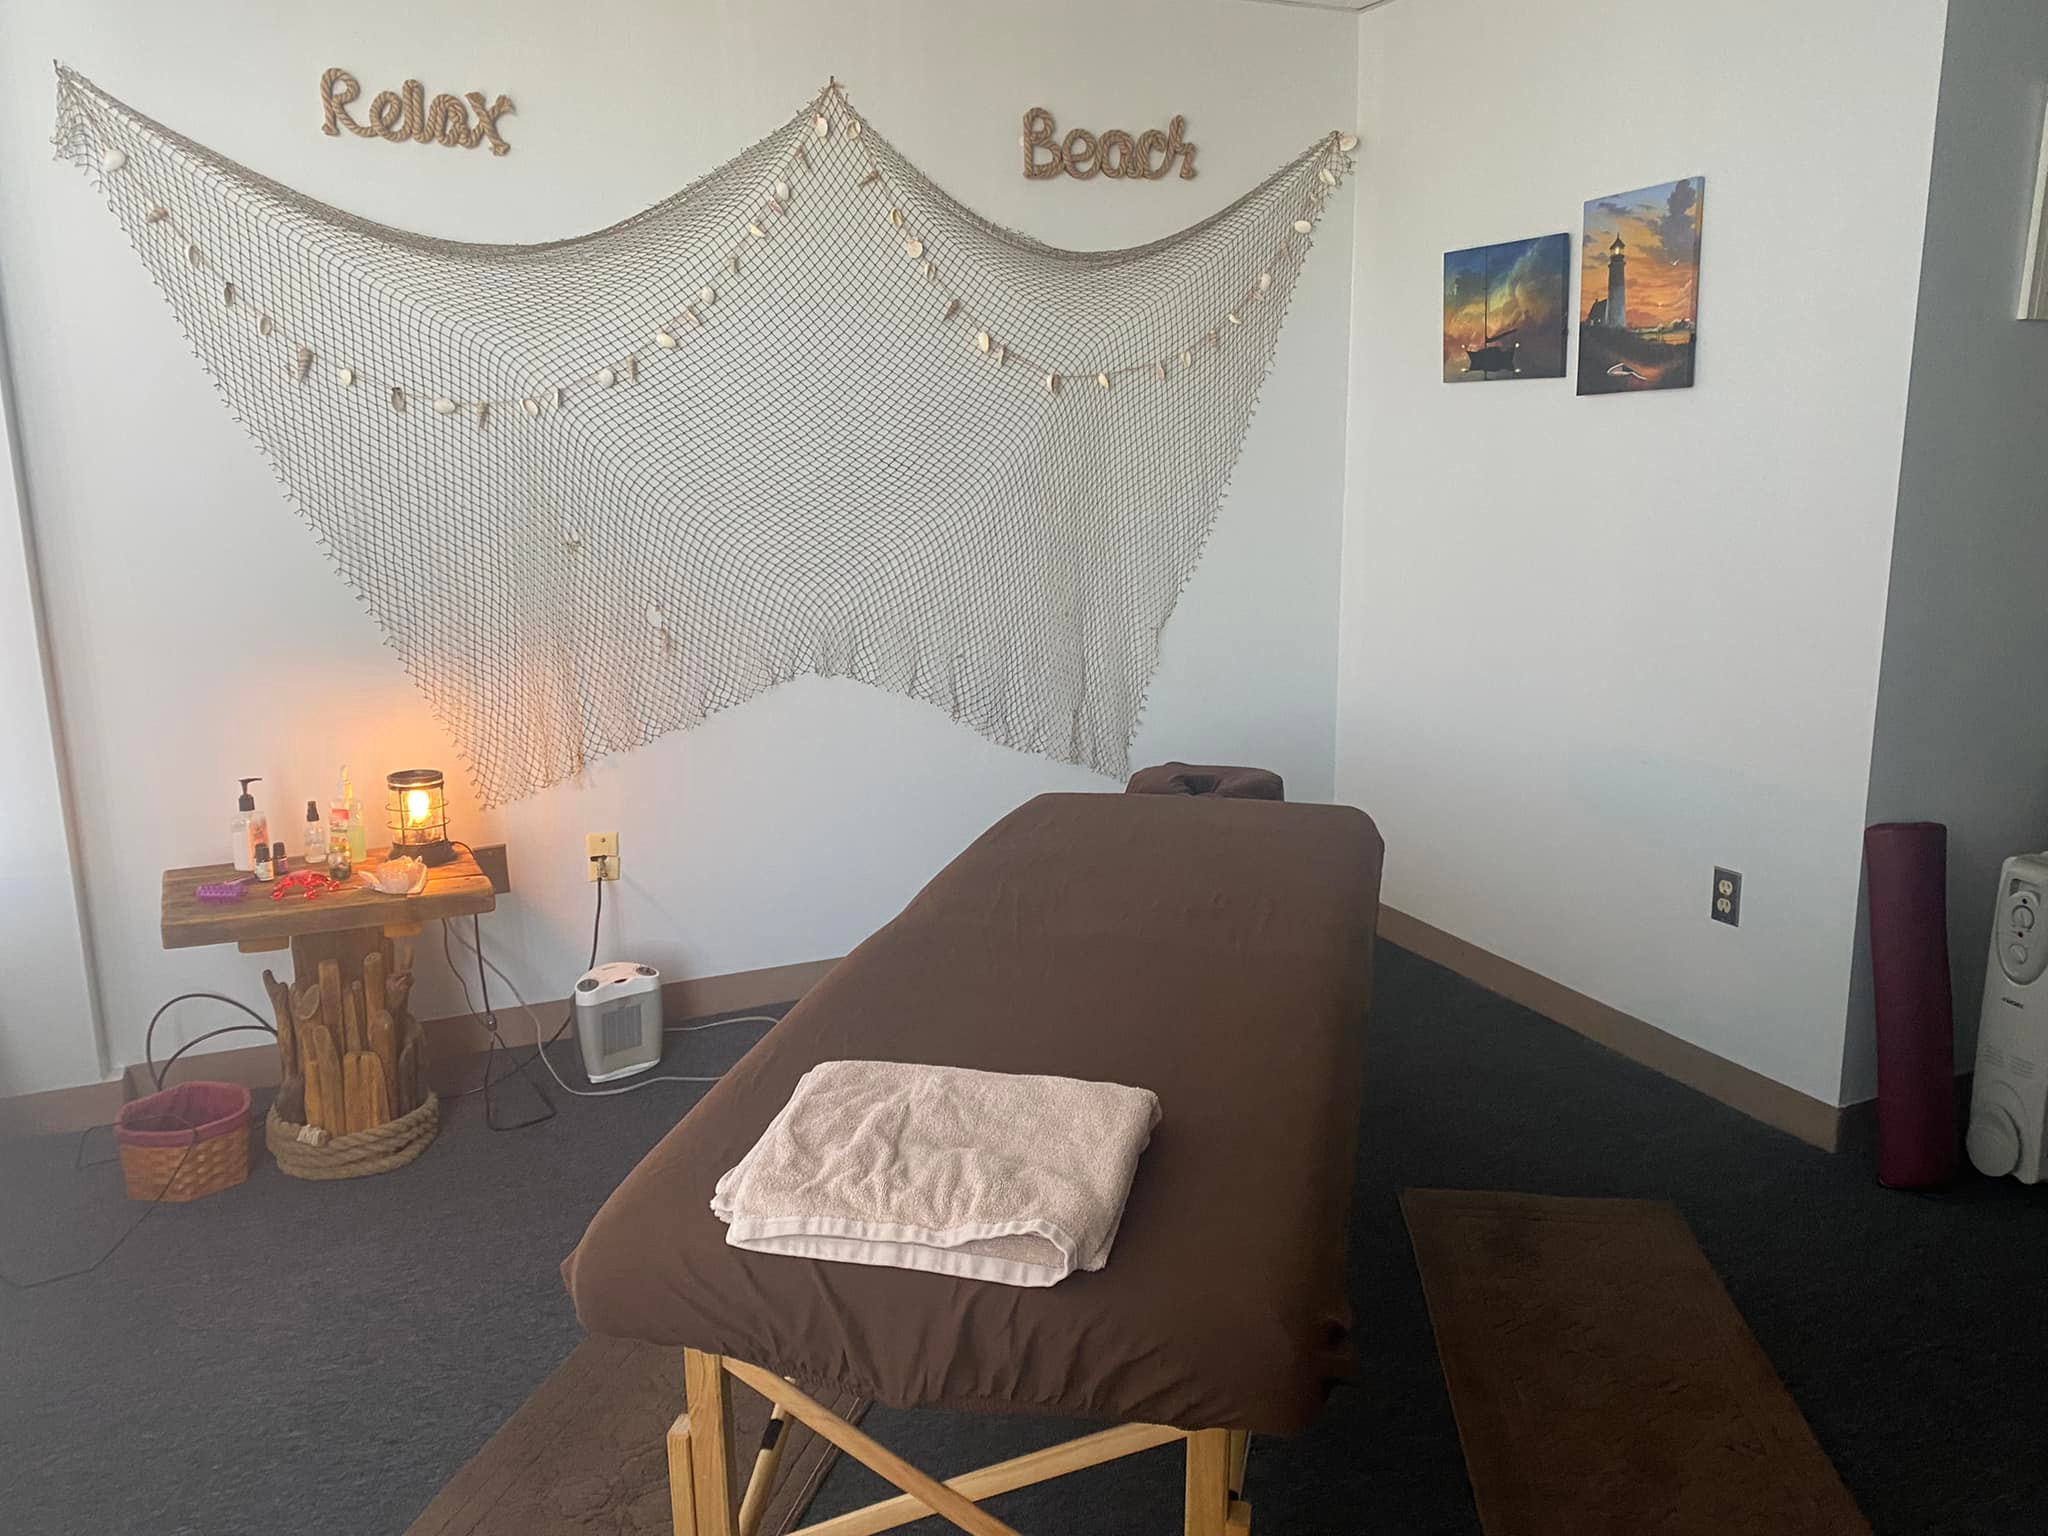 Wrights Island Massage Therapy 21139 Lorain Rd, Fairview Park Ohio 44126